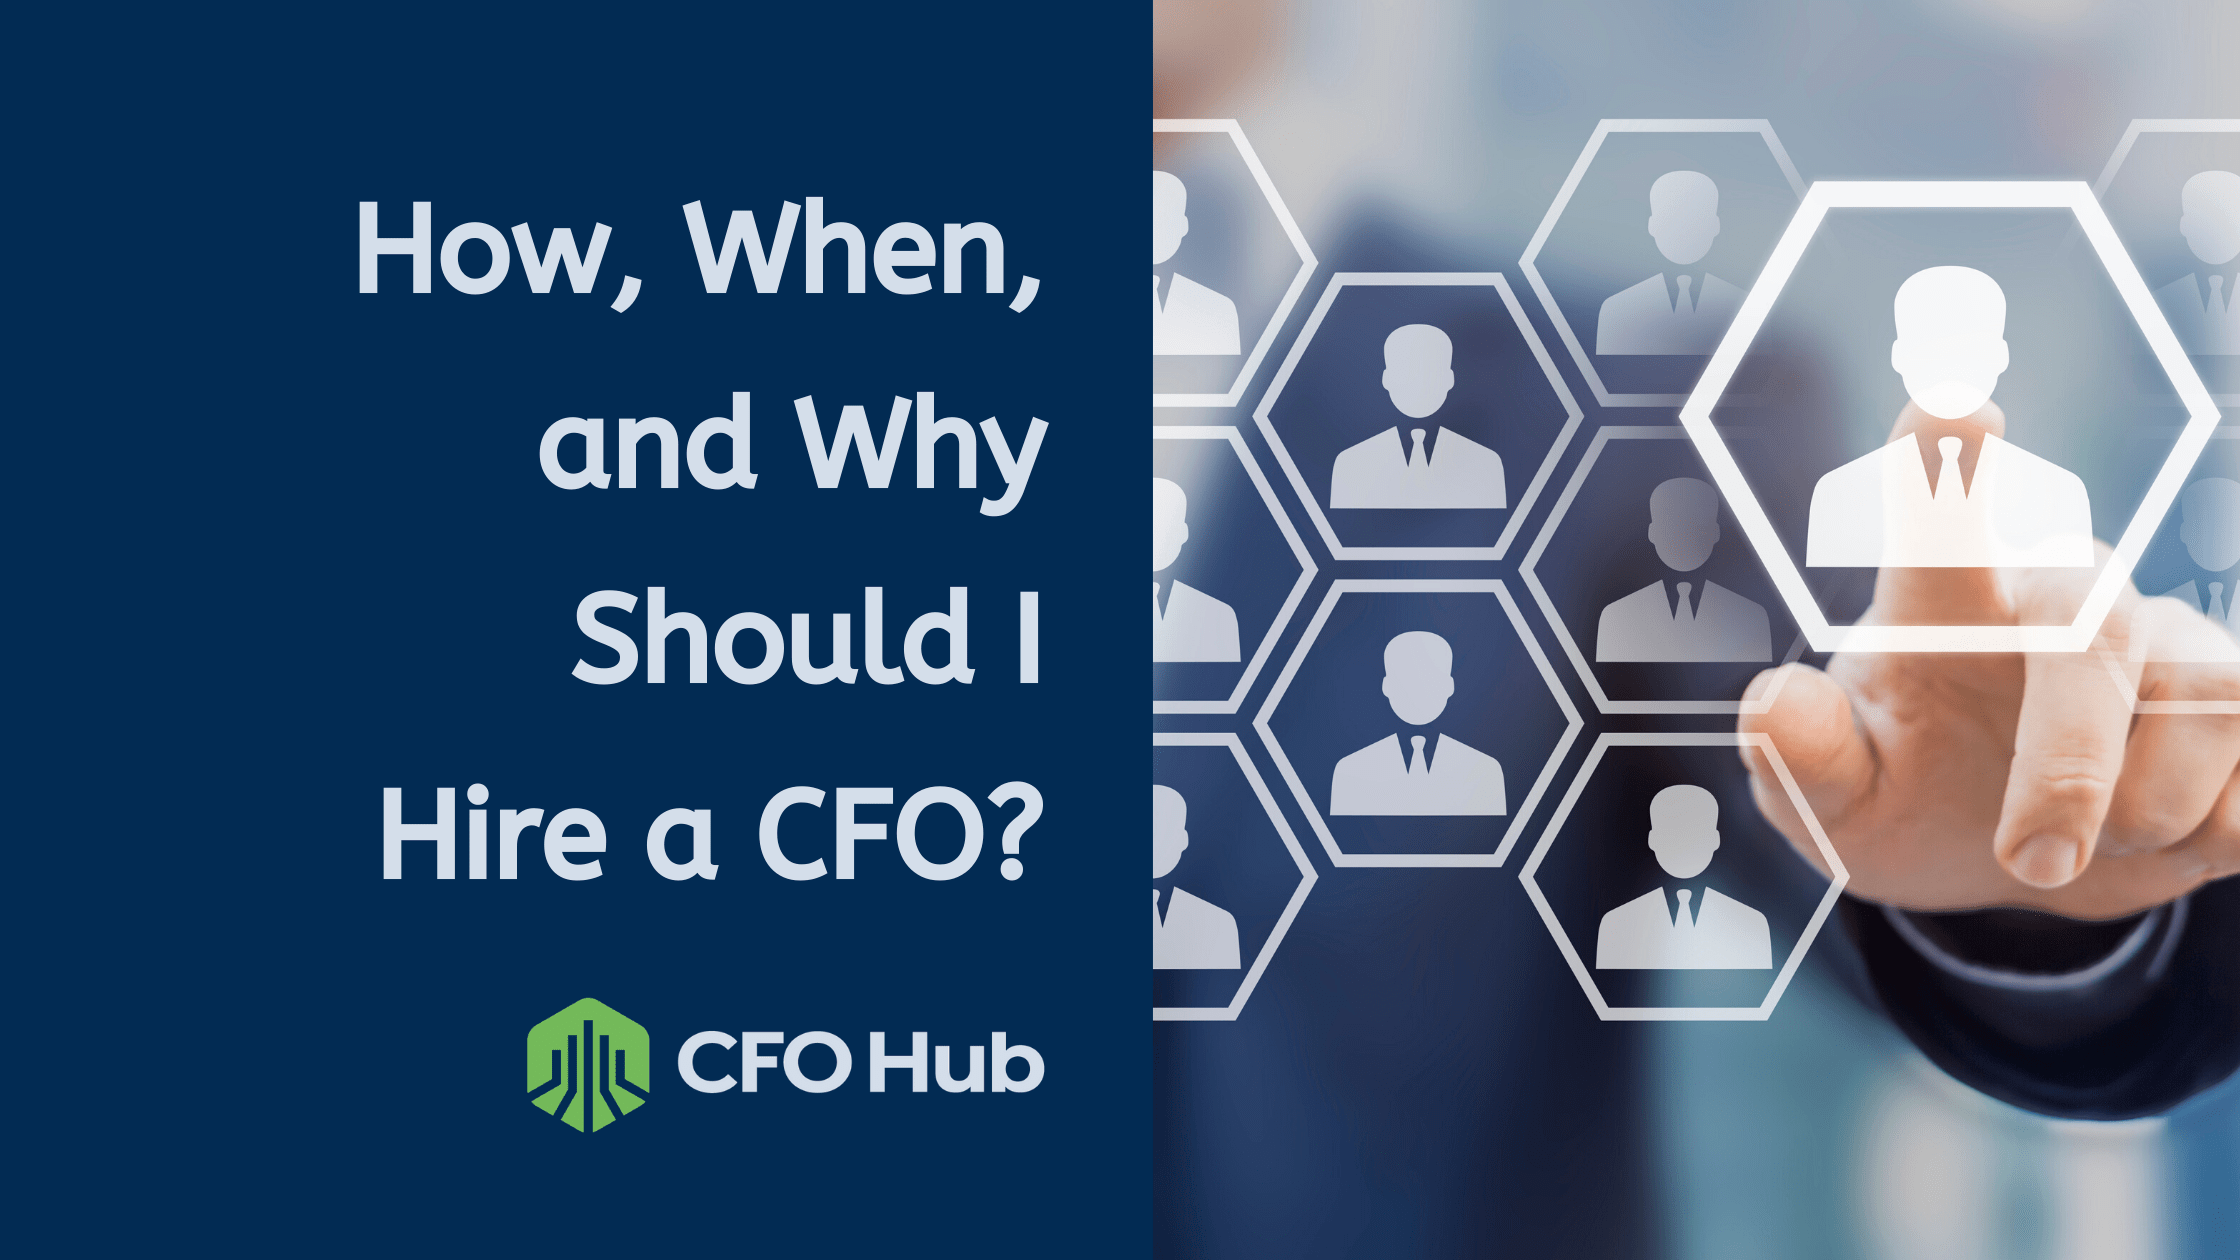 How, when and why should I hire a CFO?